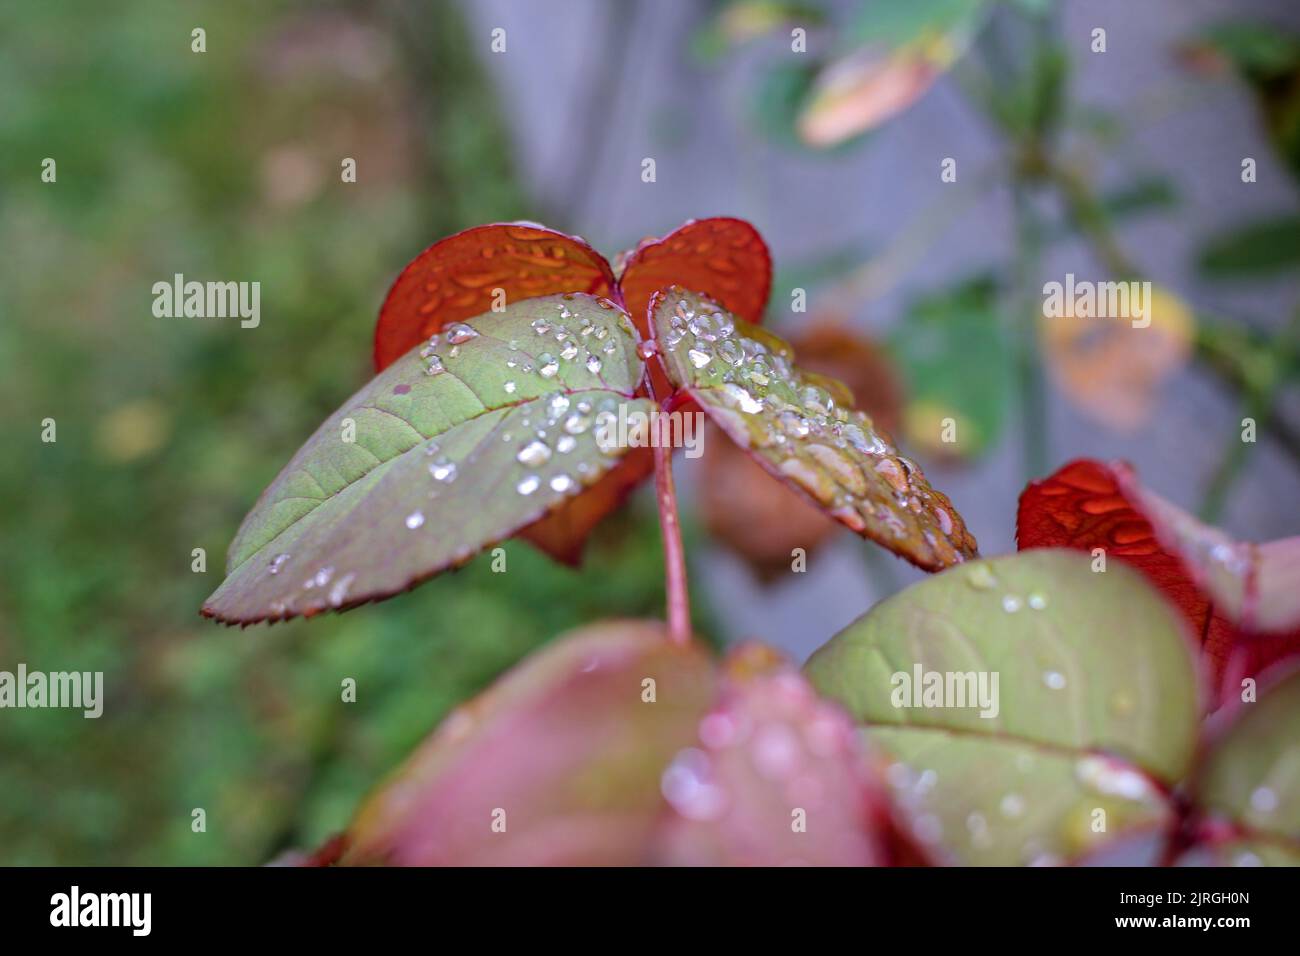 summer rain in the morning leaves drops of water on leaves Stock Photo